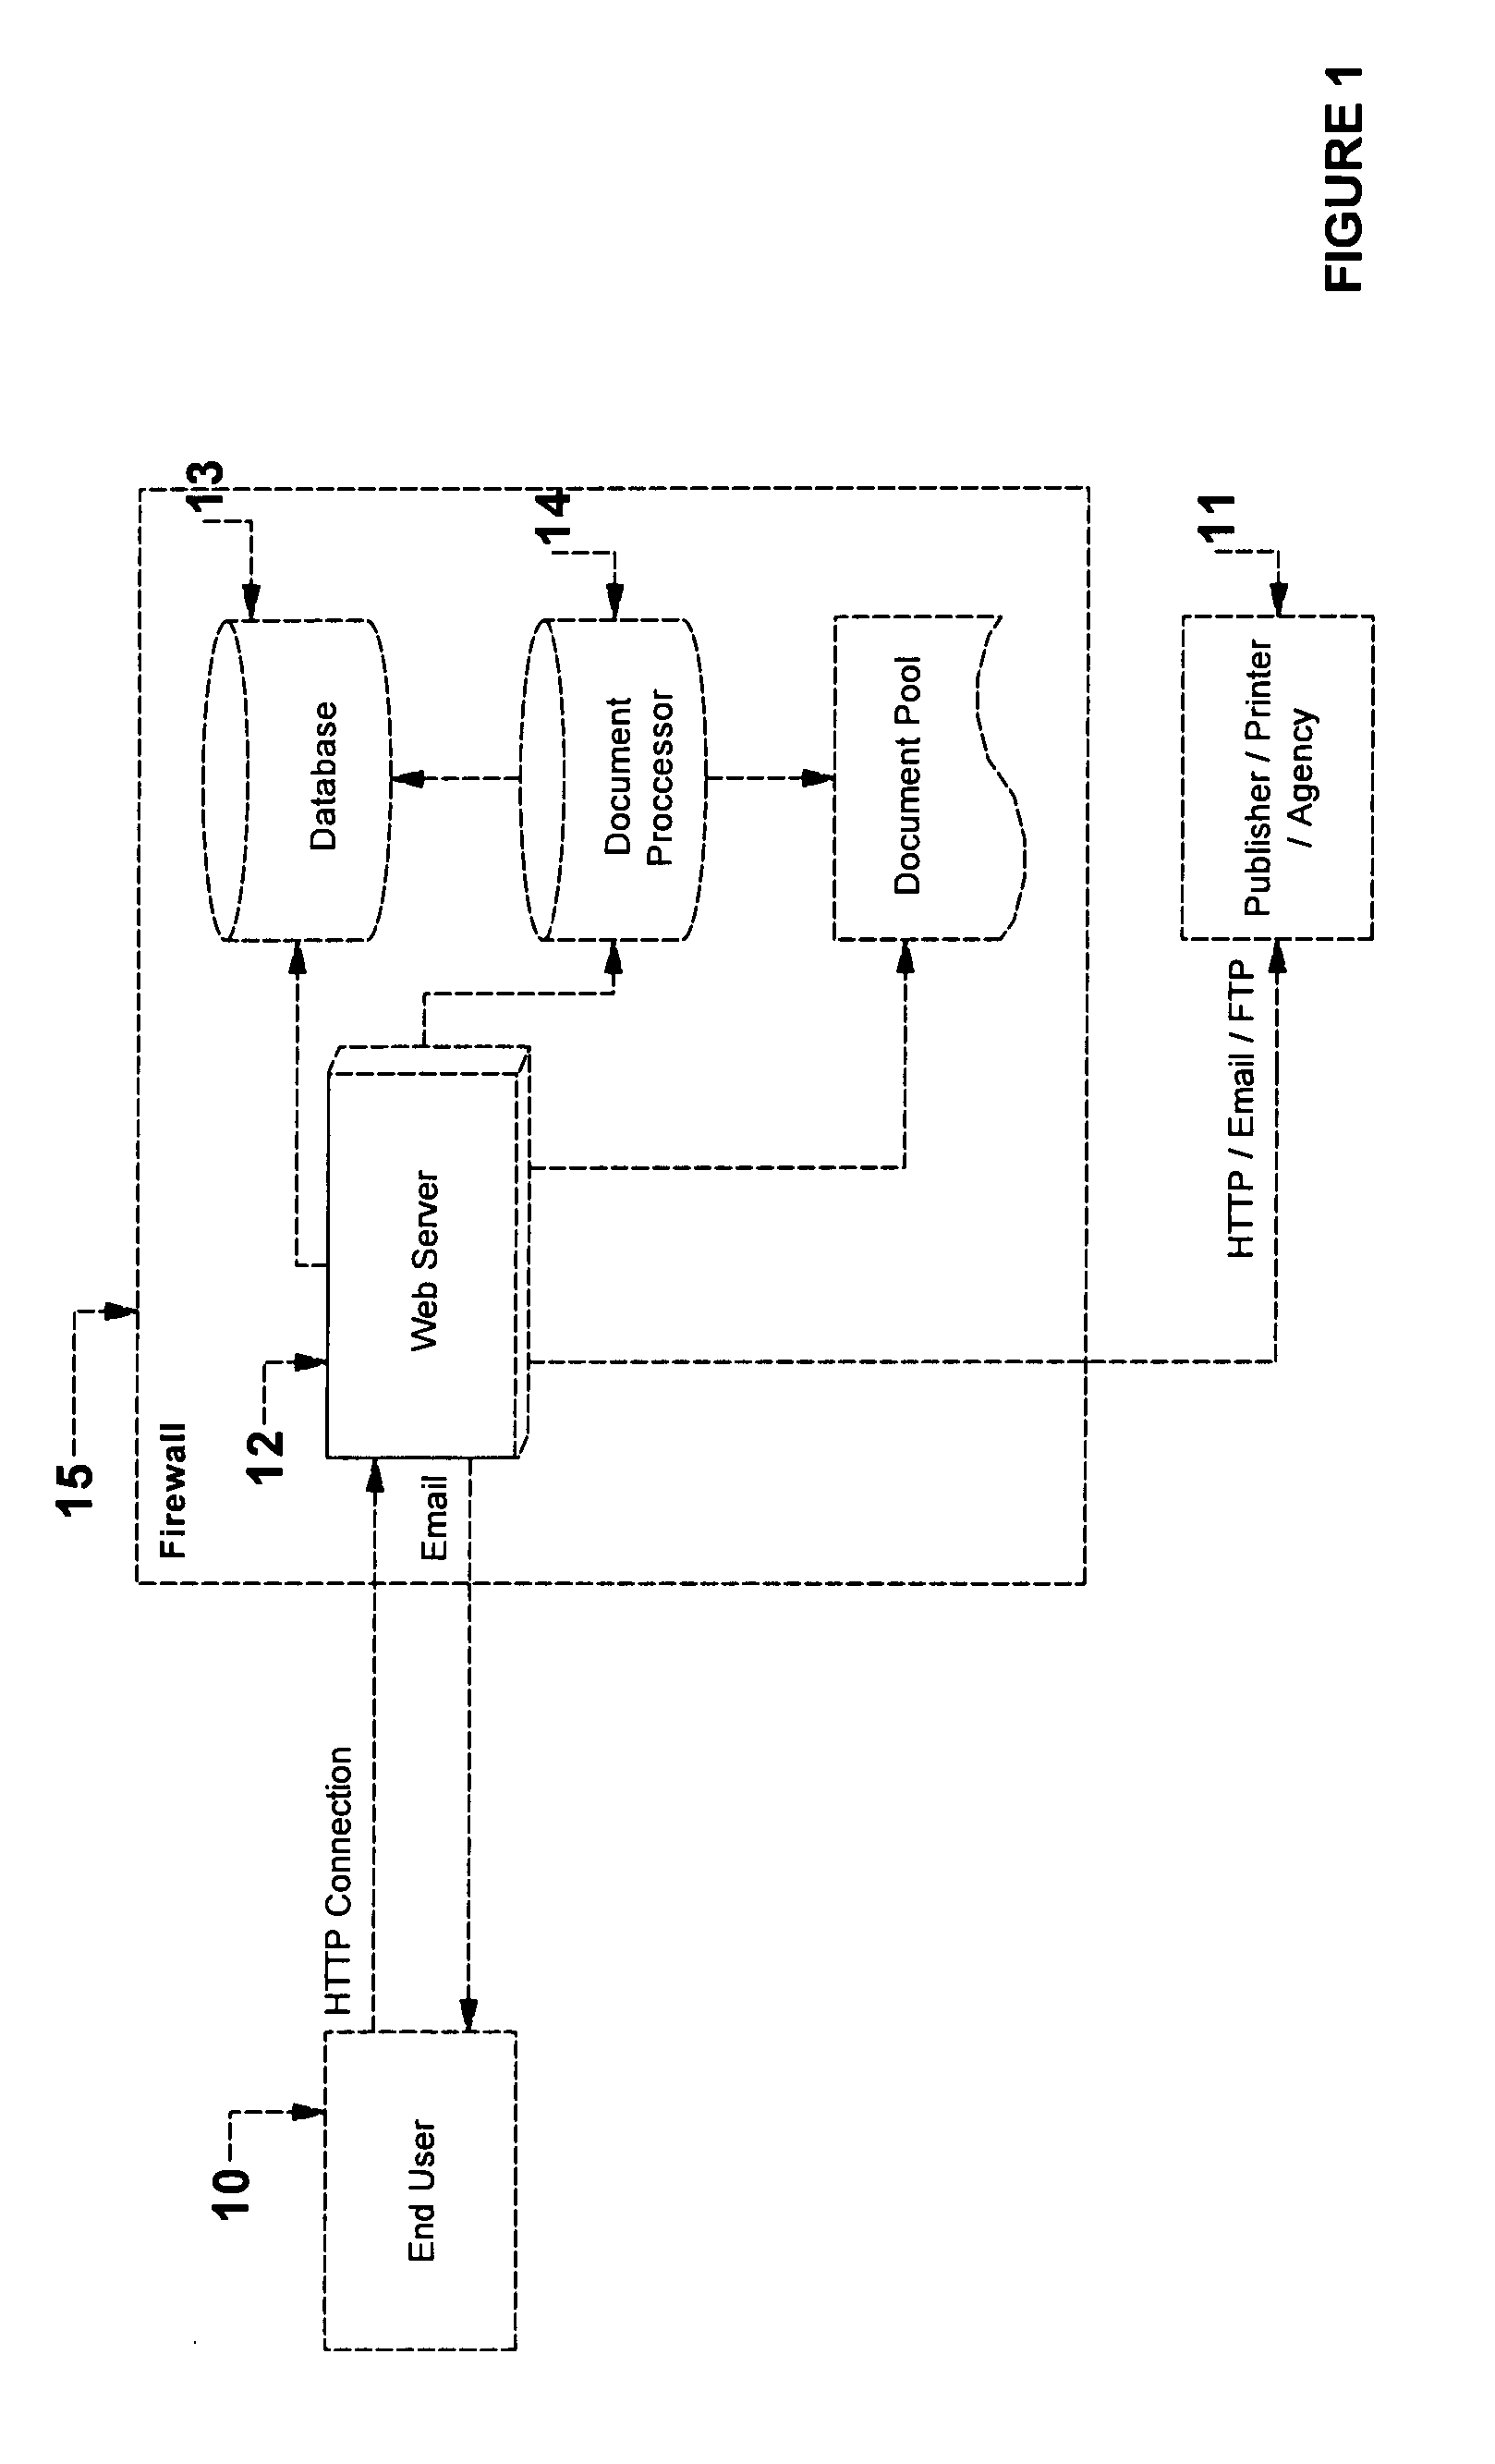 System for controlling brand integrity in a network environment